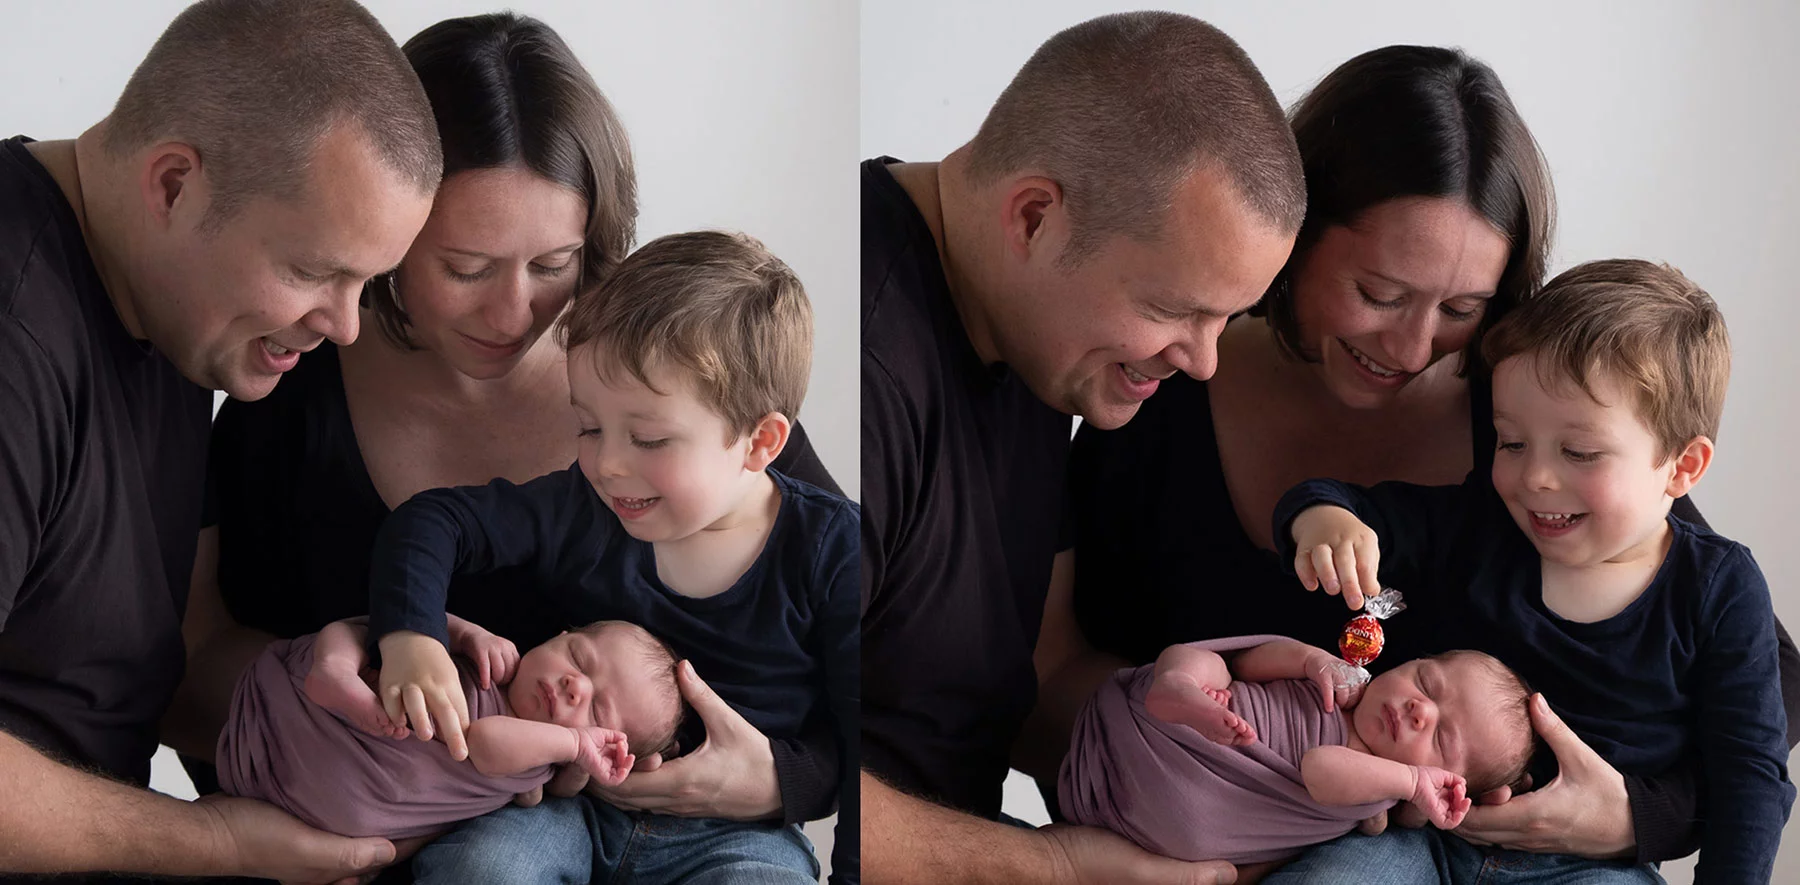 Sibling photos with newborn baby How-To Guide 29